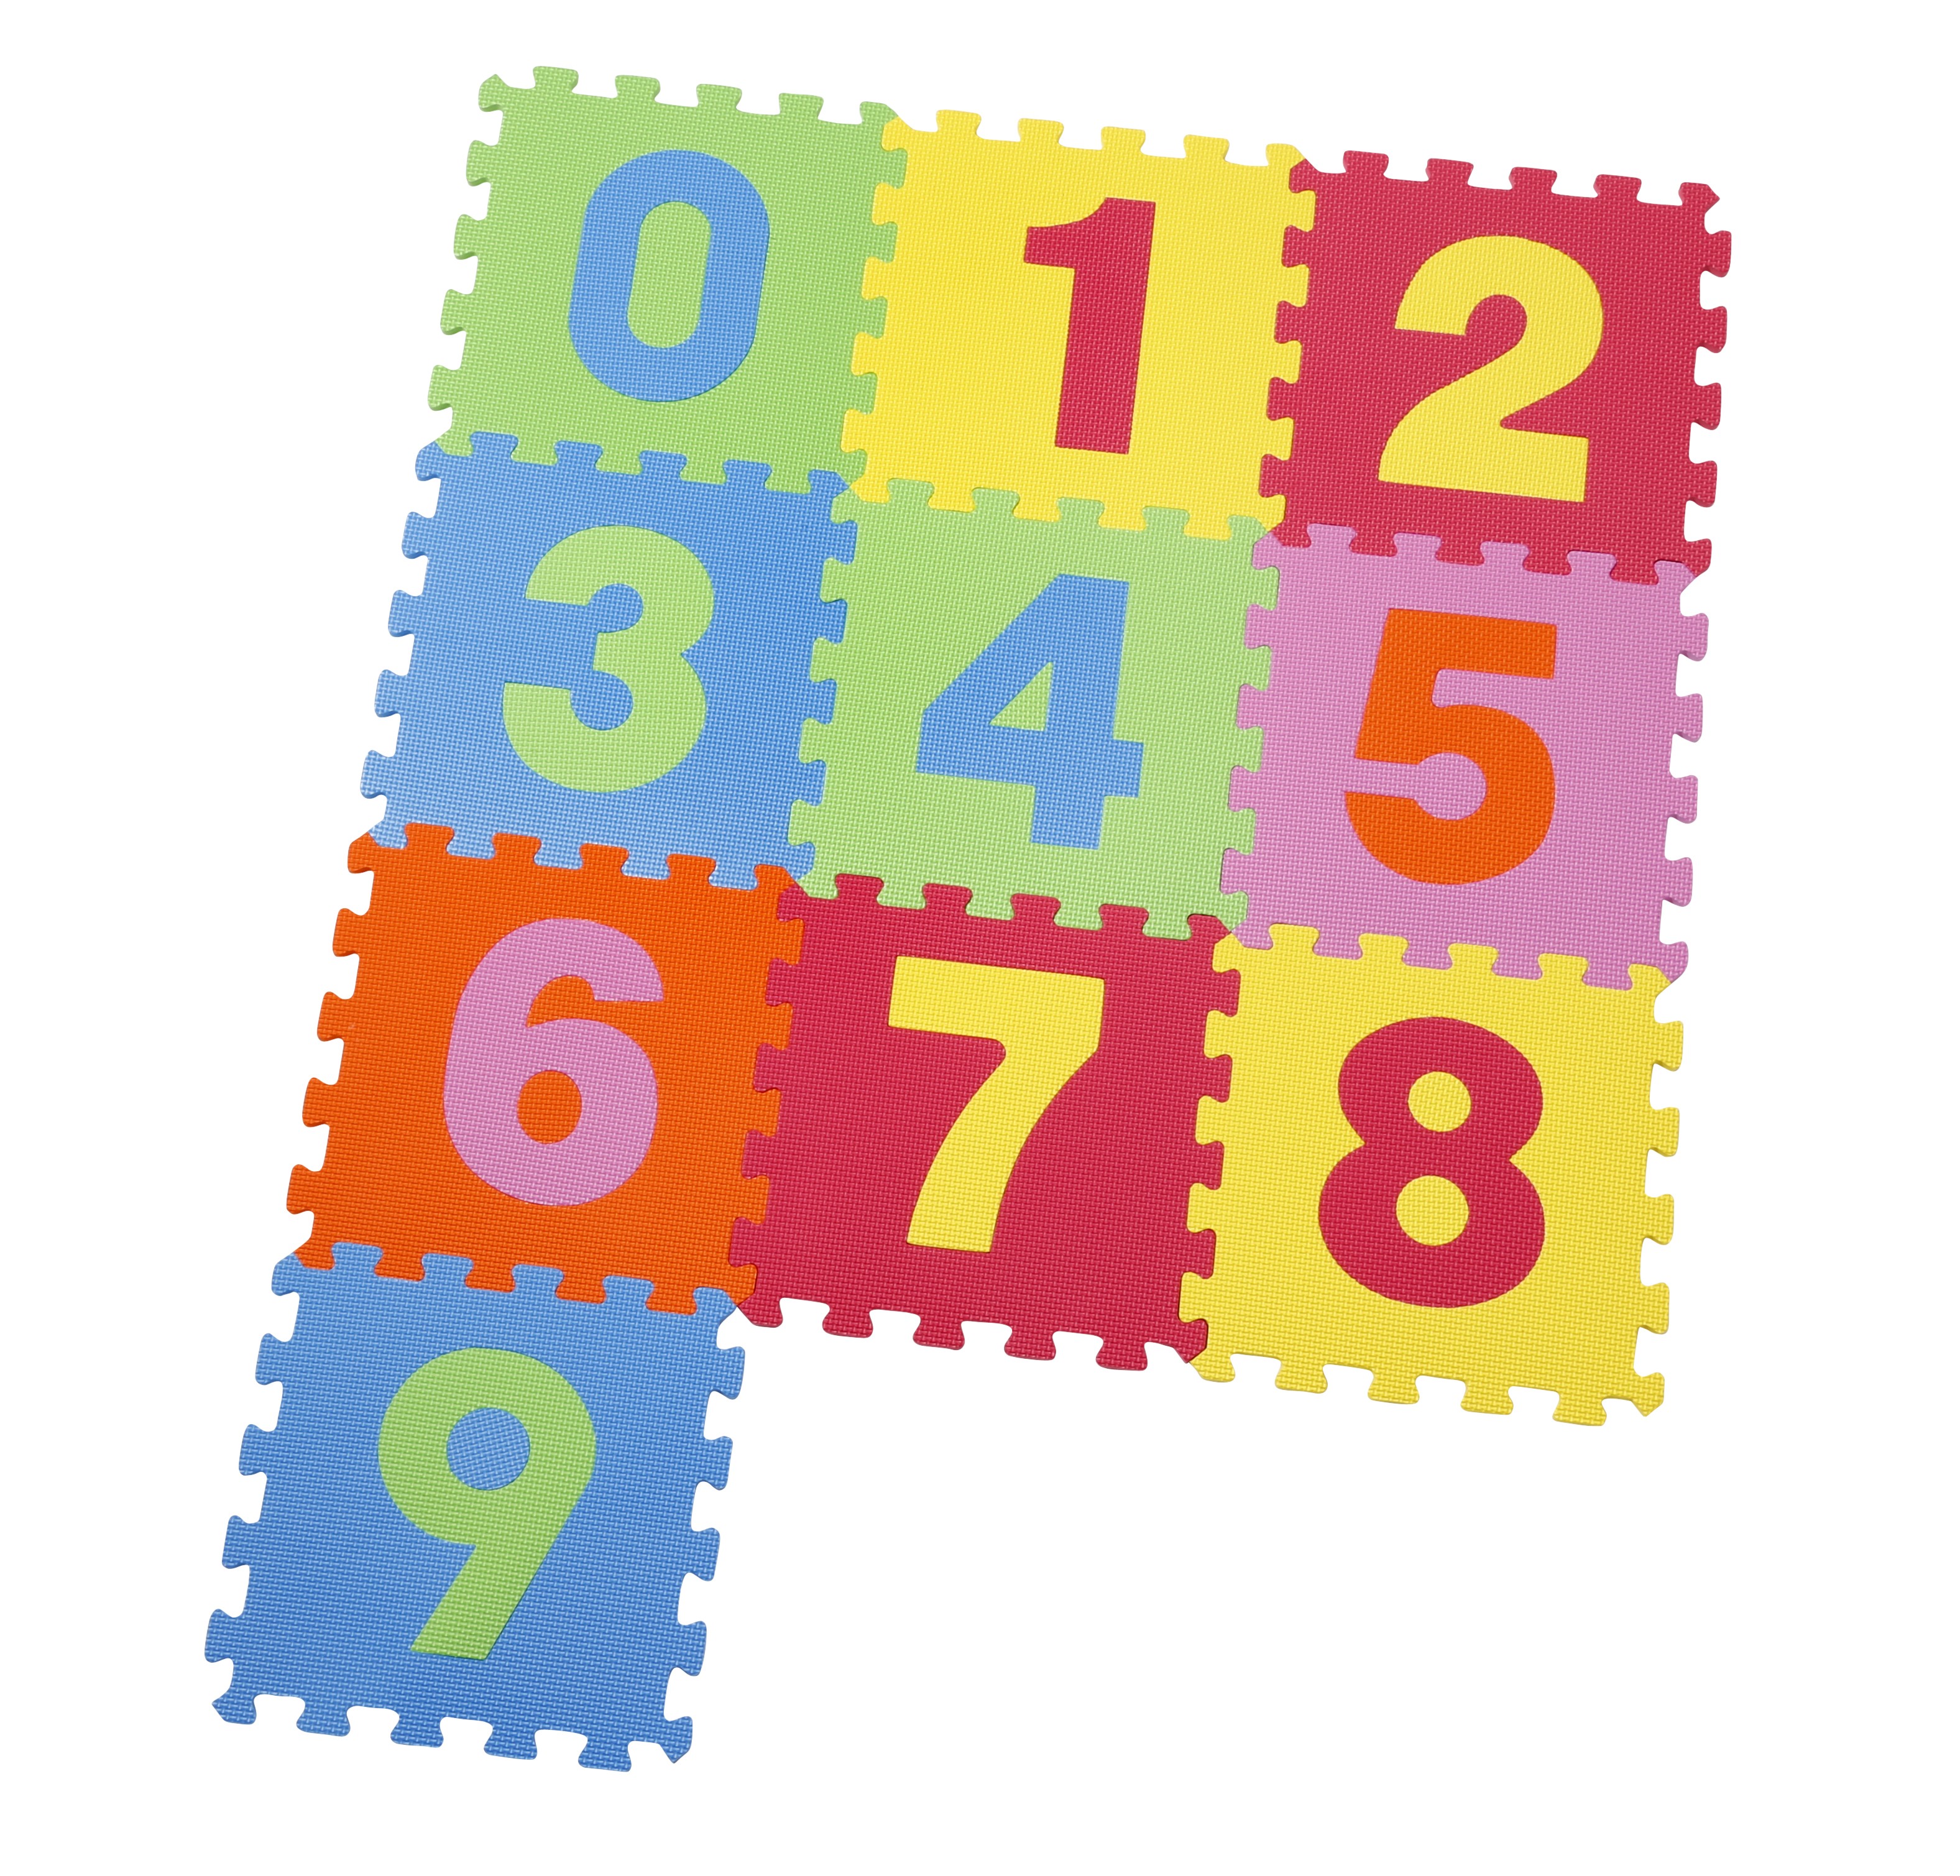 Covor puzzle din spuma Numbers 10 piese buy4baby.ro imagine noua